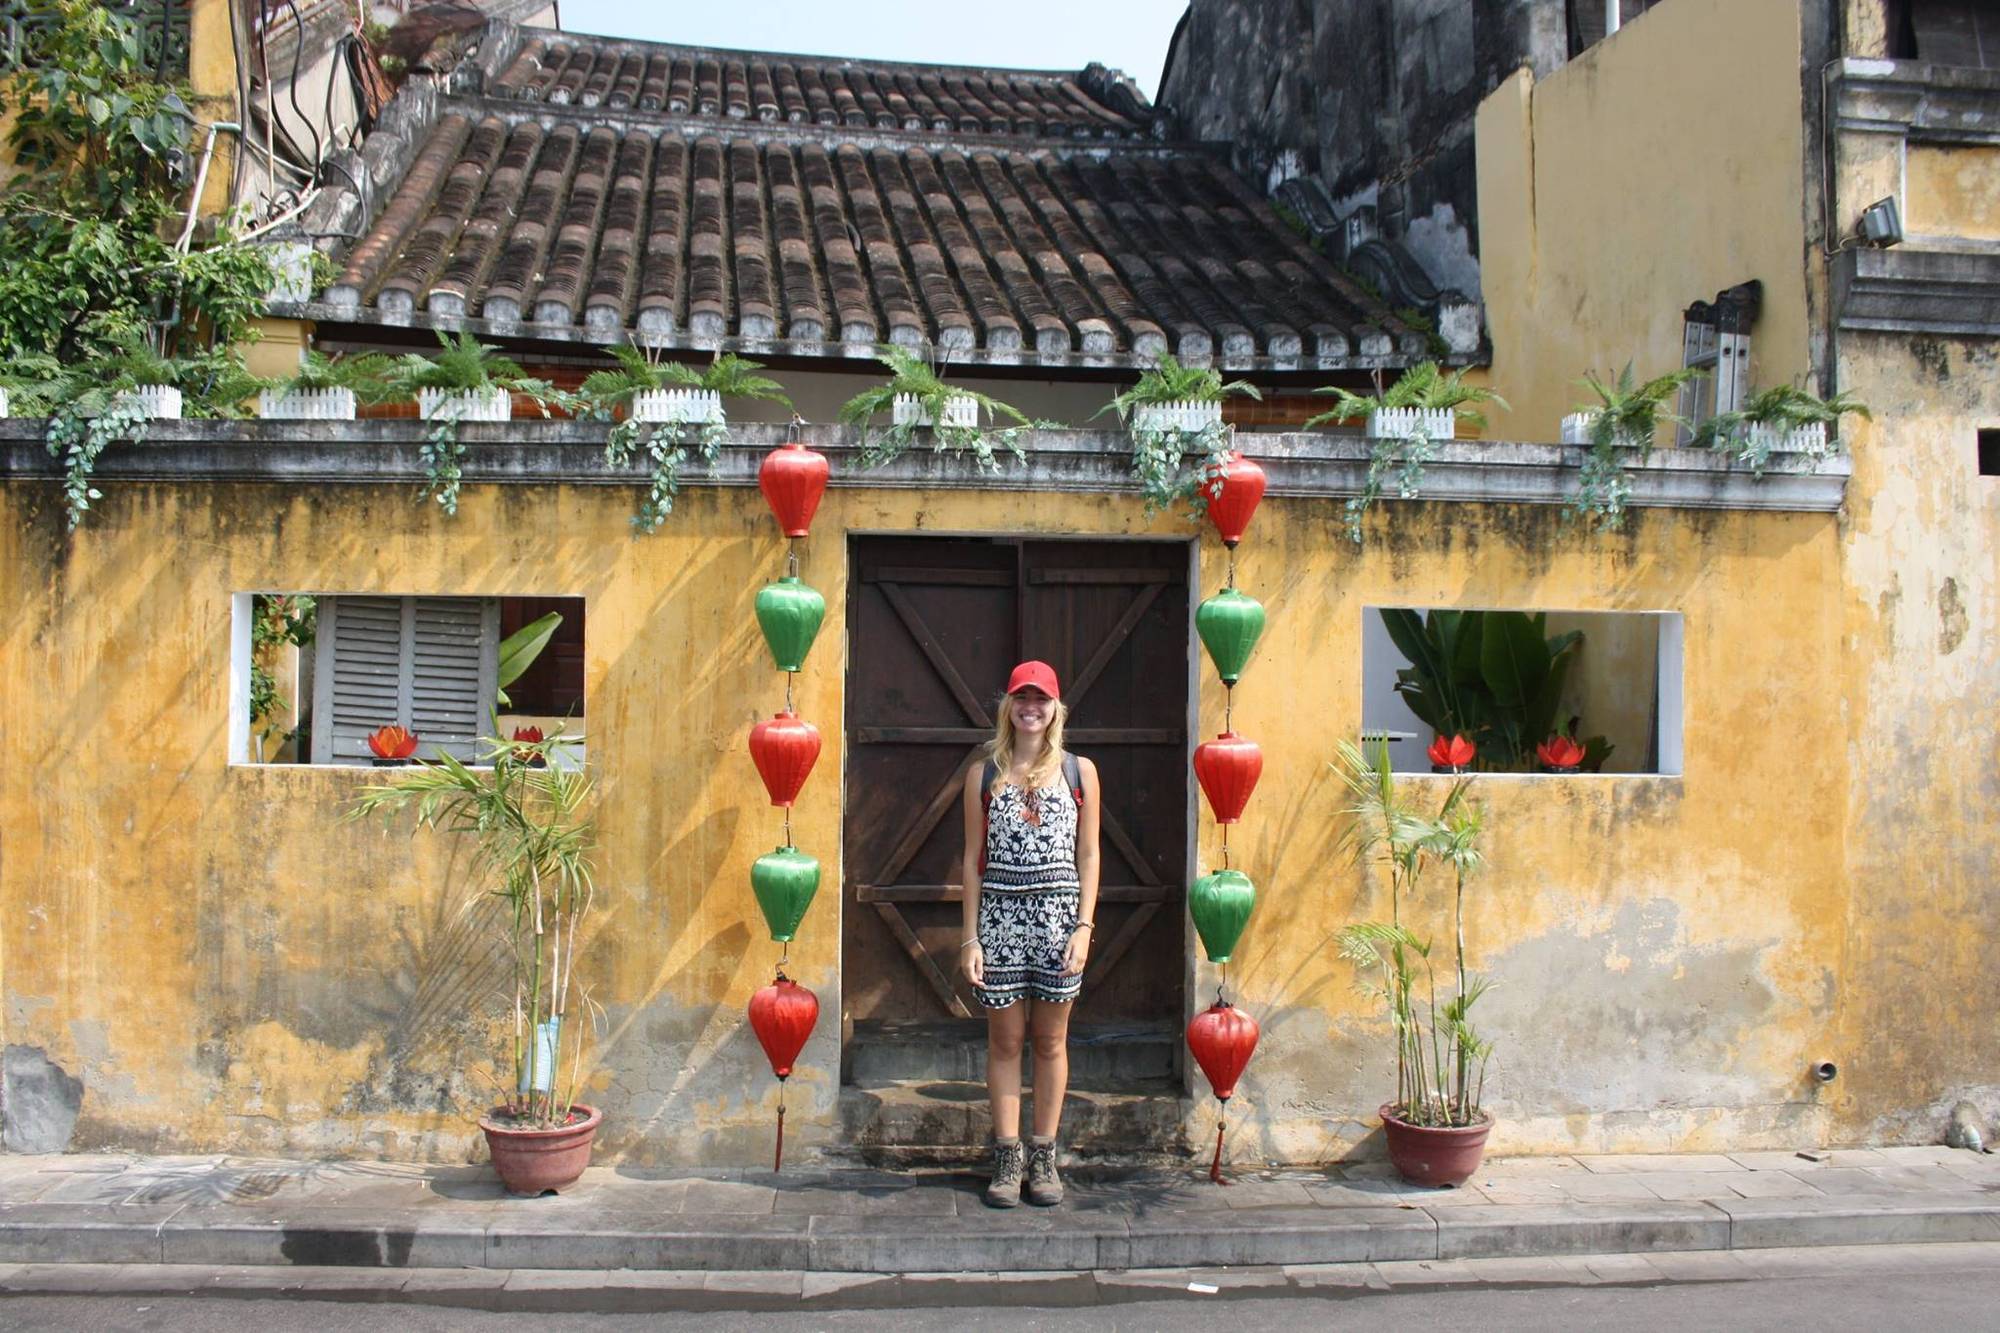 Despite being very touristic, Hoi An had its charm